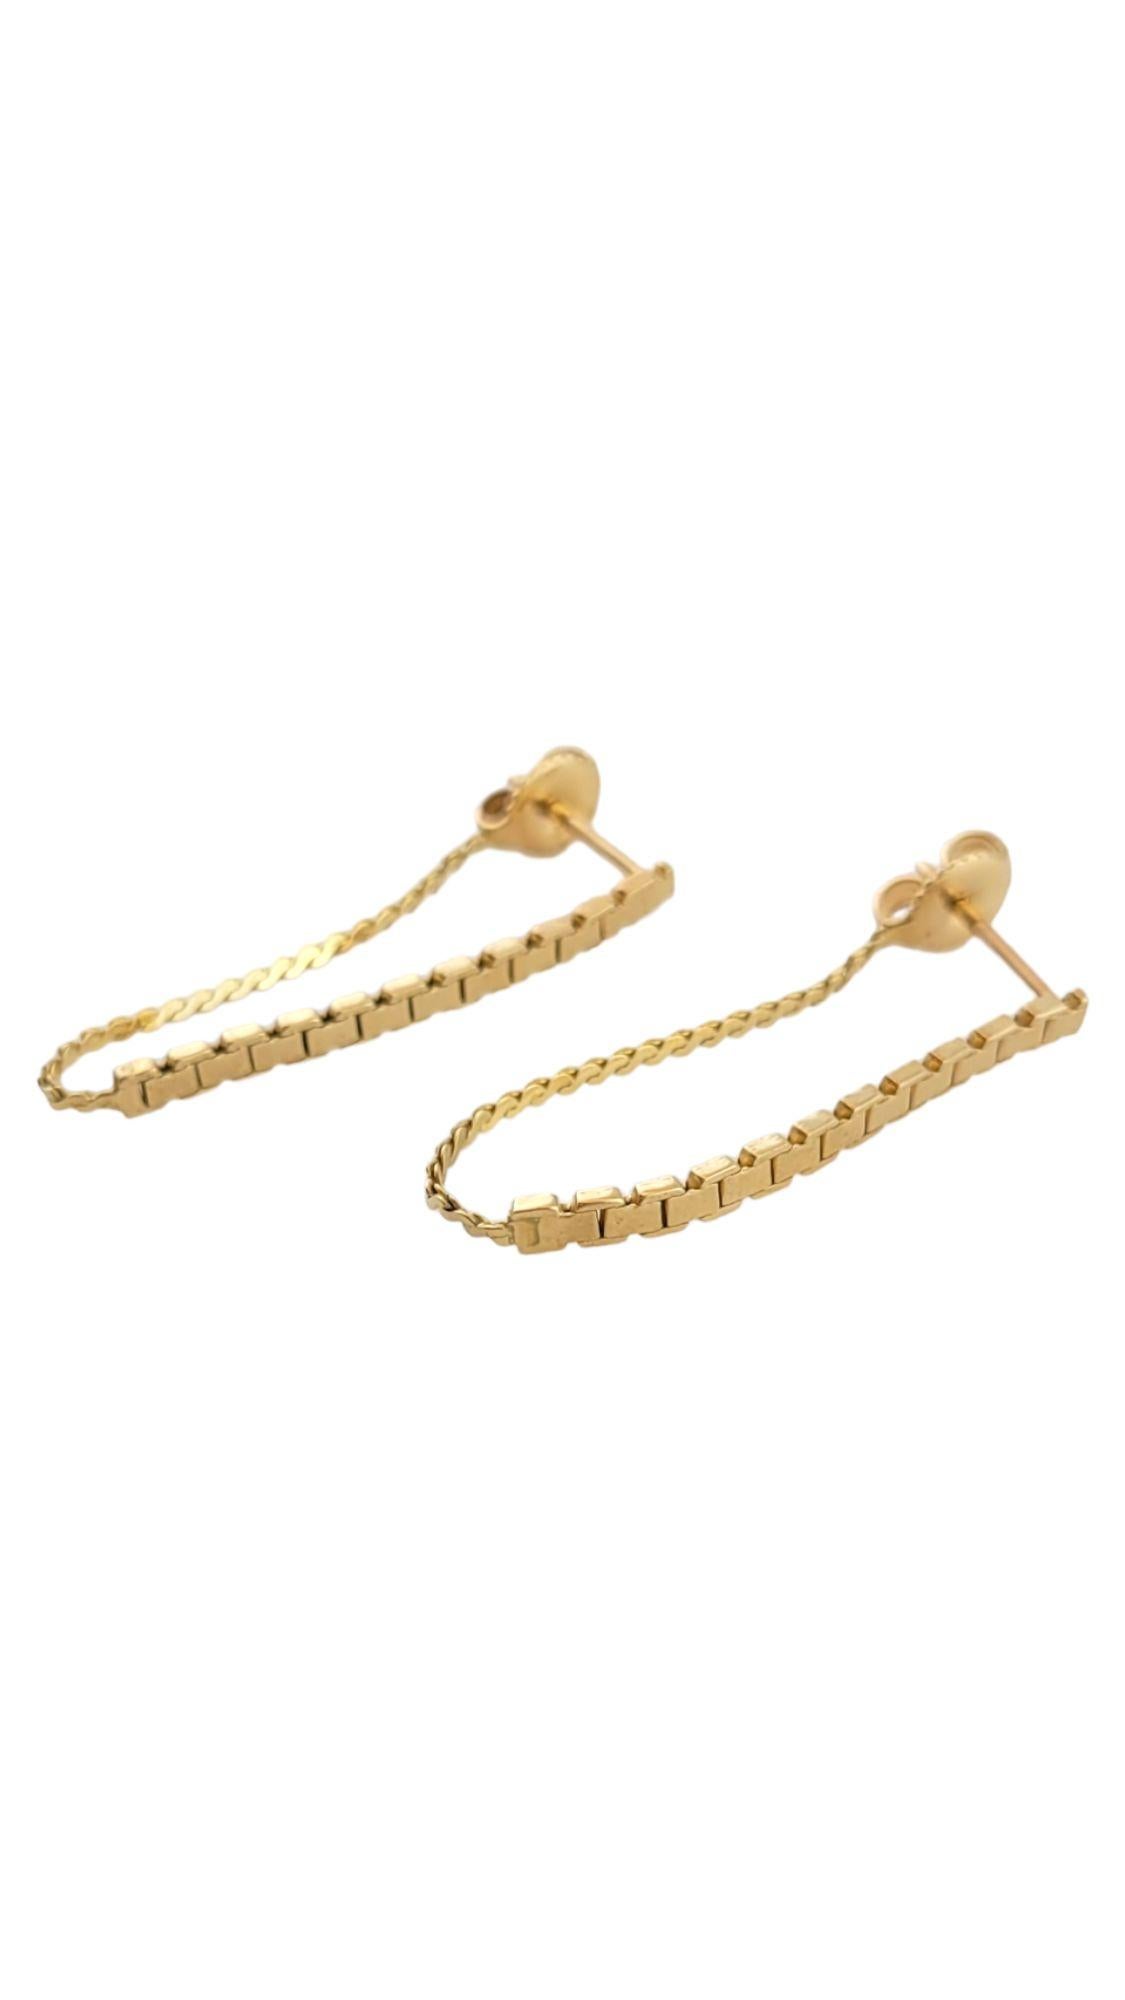 These yellow gold earrings feature a hanging chain loop.

Size: 30.7 mm X 12.3 mm

Weight: 2.6 g/ 1.6 dwt

Tested 10K

Very good condition, professionally polished.

Will come packaged in a gift box or pouch (when possible) and will be shipped U.S.